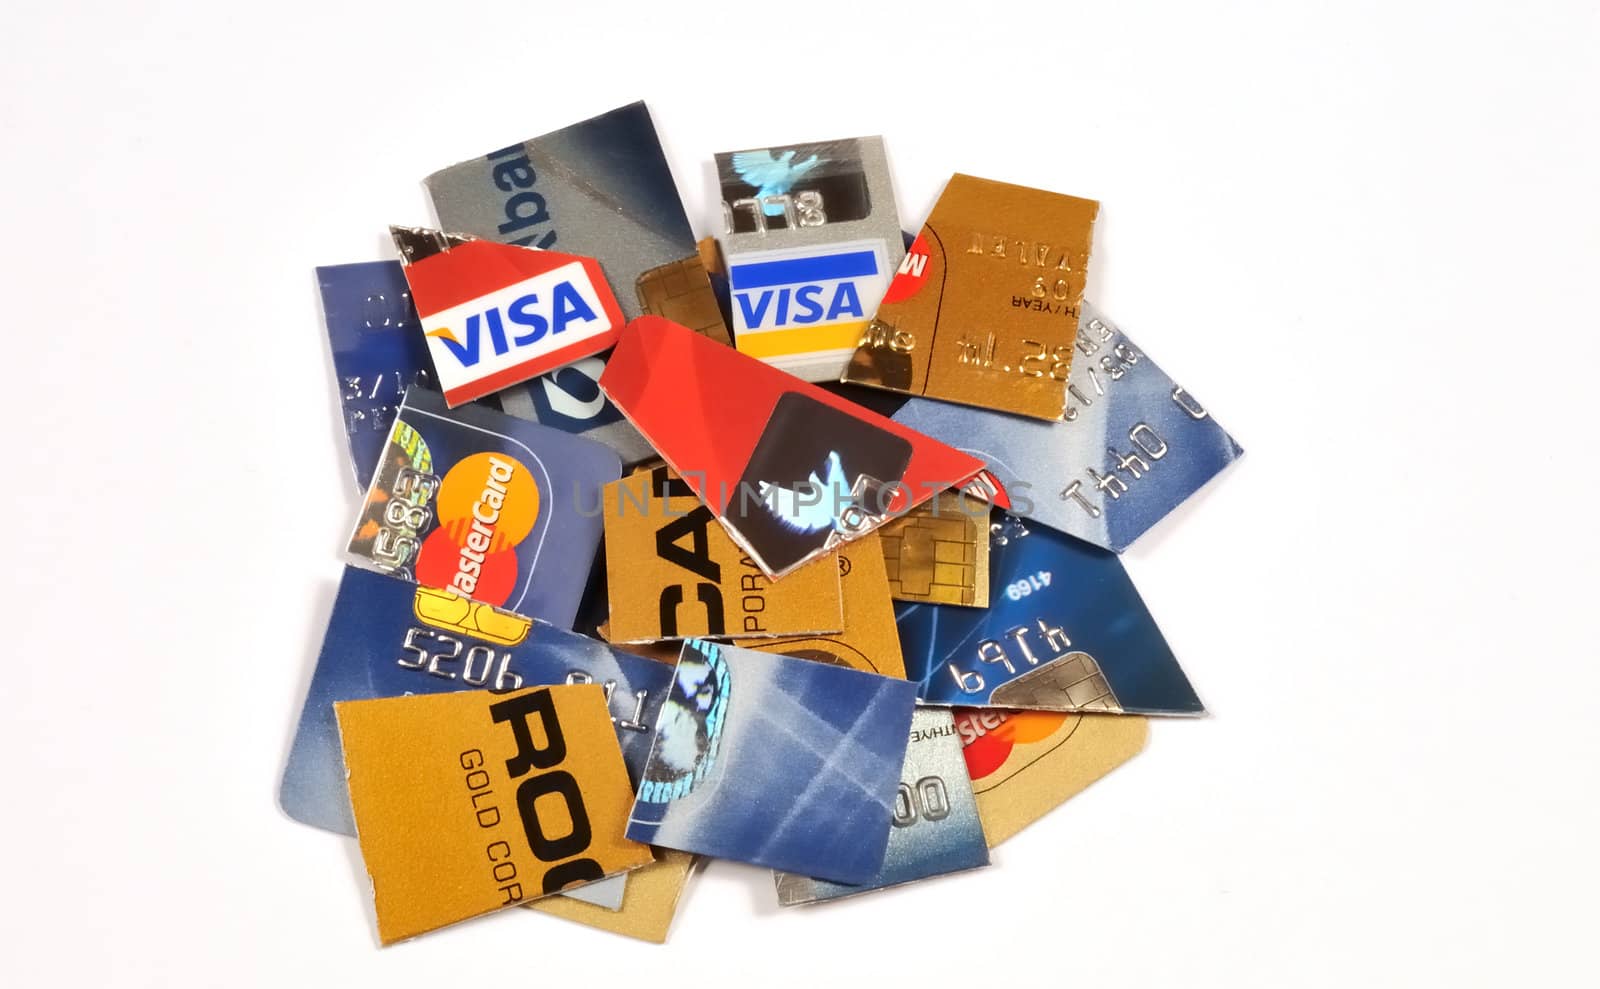 Some creditcards cut into pieces